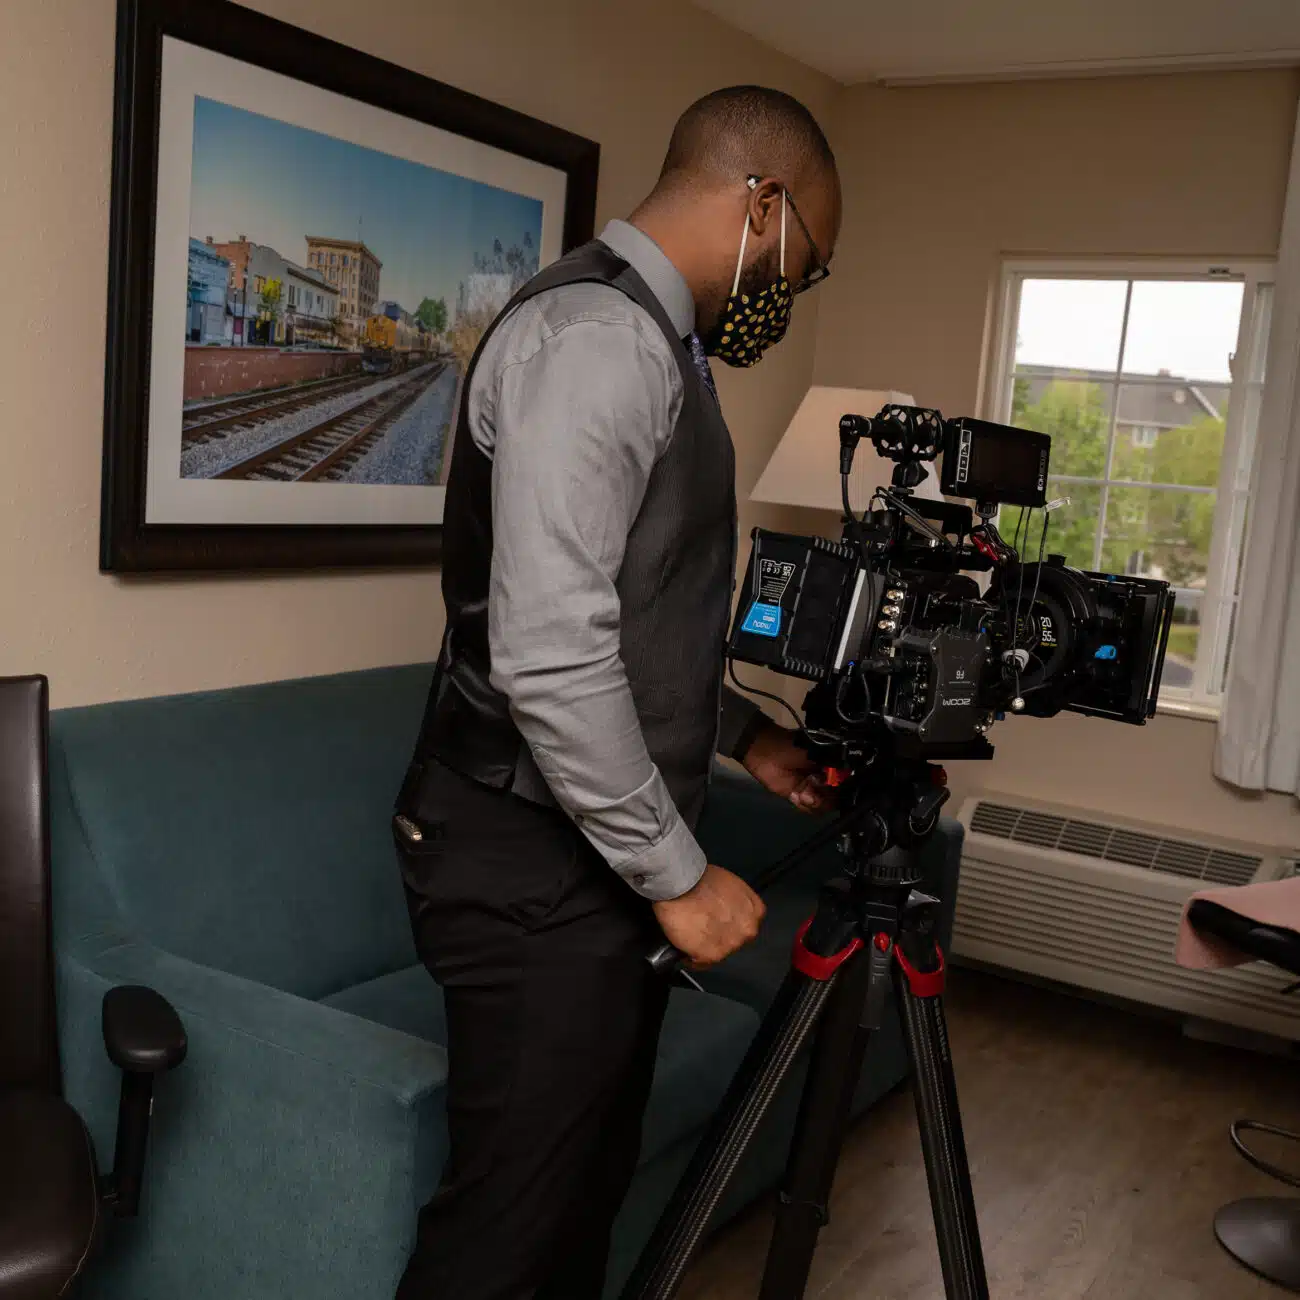 Dontavious Chesson capturing the bride getting her makeup done and disucussing the wedding planning process with her bridesmaids. Dontavious Chesson is using the Blackmagic URSA Mini Pro 12k camera.